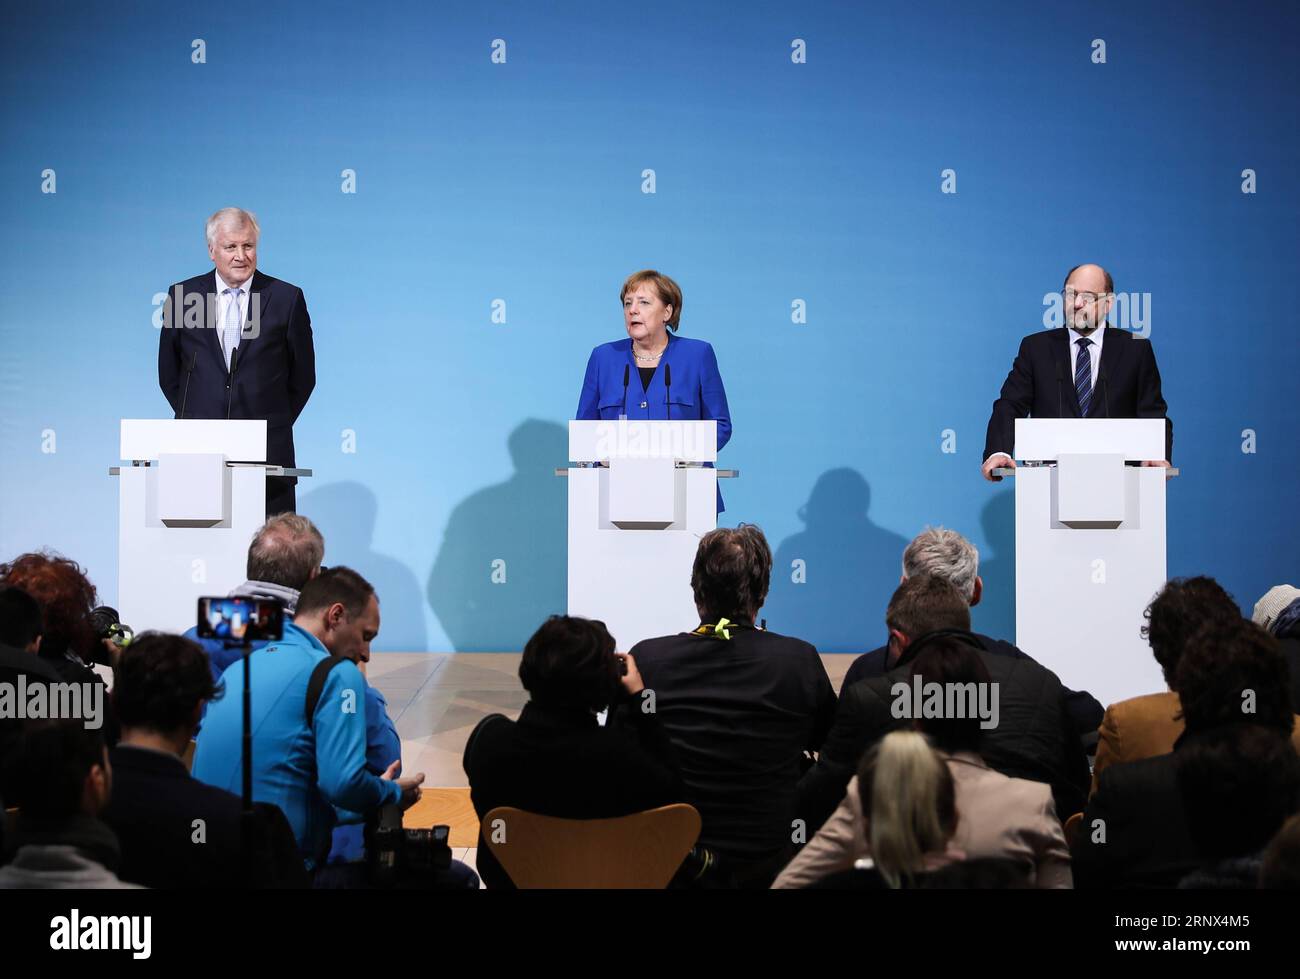 (180112) -- BERLIN, Jan. 12, 2018 -- German Chancellor and leader of German Christian Democratic Union (CDU) Angela Merkel (C), leader of German Christian Social Union (CSU) Horst Seehofer (L) and leader of German Social Democratic Party (SPD) Martin Schulz attend a joint press conference after coalition talks at the headquarters of SPD, in Berlin, Germany, on Jan. 12, 2018. German Chancellor Angela Merkel s conservatives and the Social Democrats (SPD) on Friday achieved a breakthrough in their exploratory talks aimed at forming a new coalition government, local media reported. )(srb) GERMANY- Stock Photo